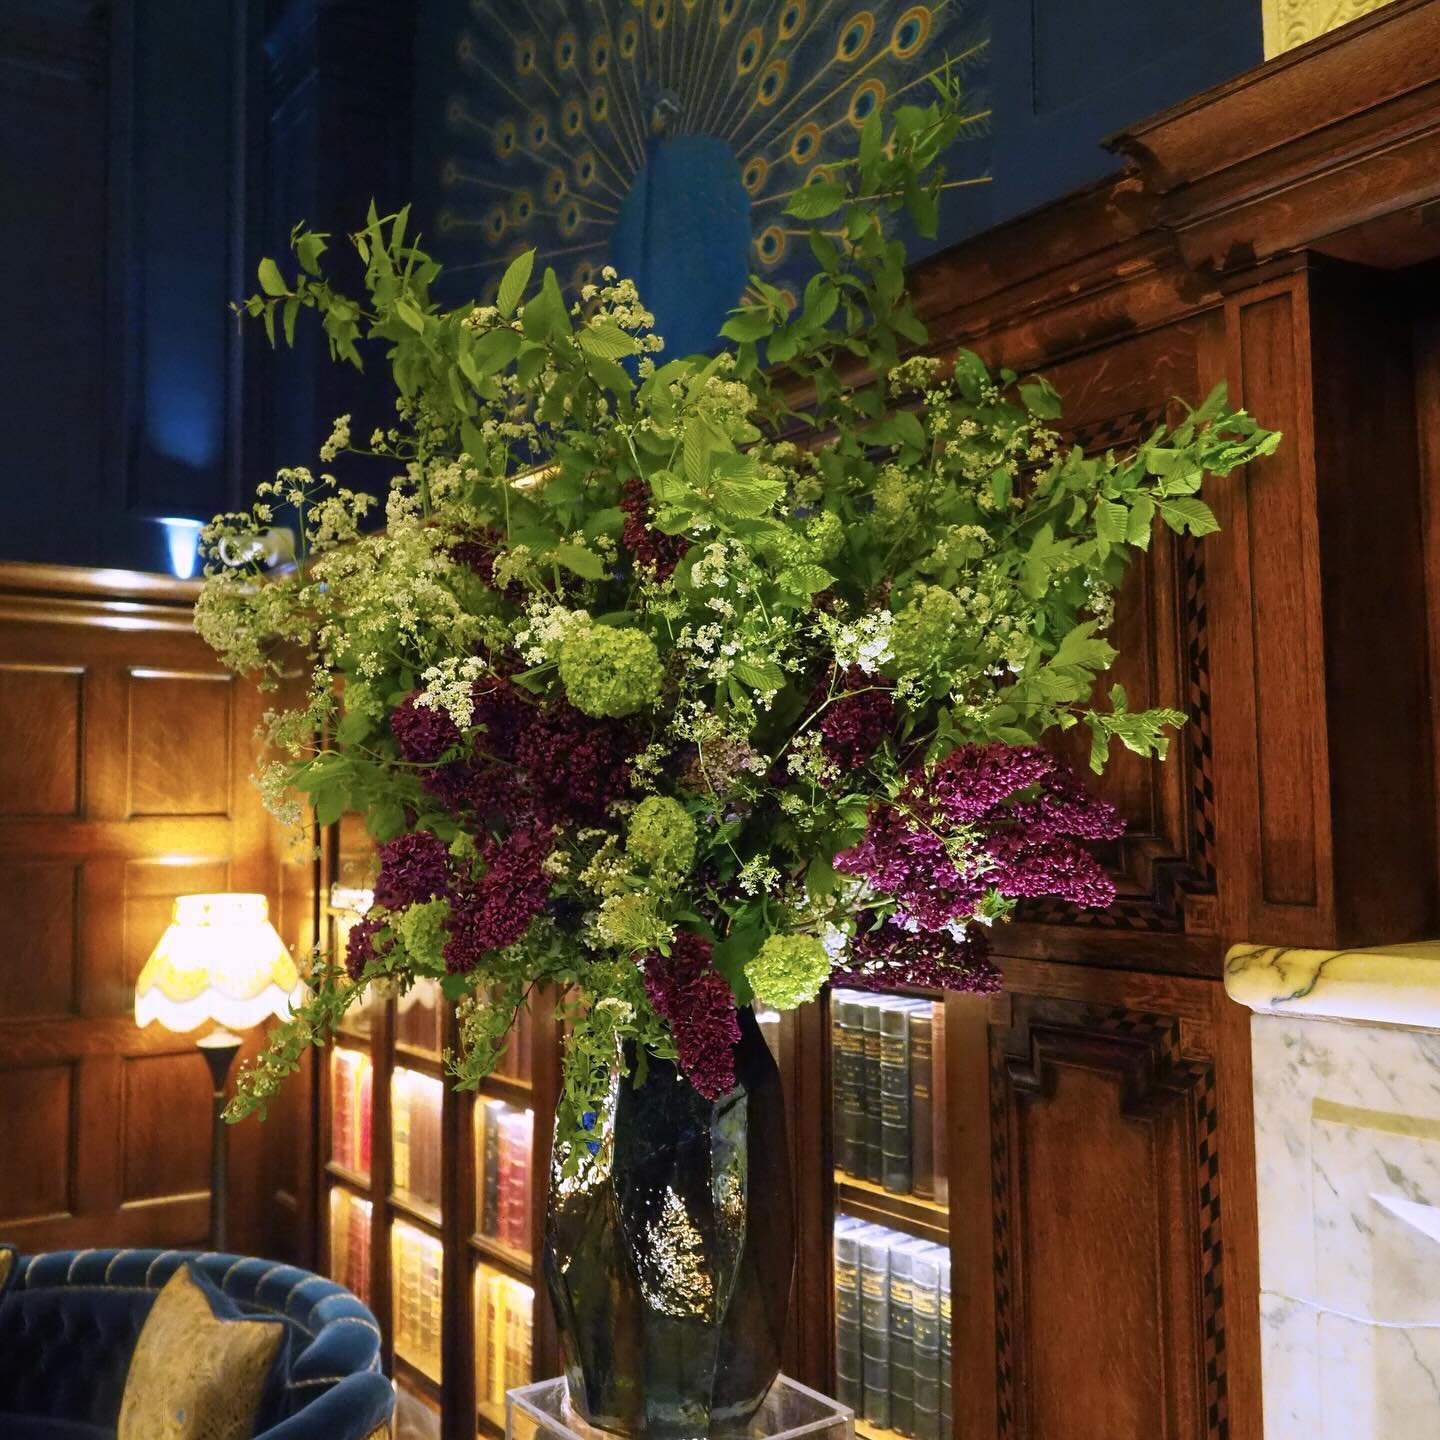 Loving these big, fluffy displays of English grown flowers: Featuring cow parsley, lilac , hornbeam and guelder rose. Available for a short period only. 

#londonflorist #englishflowers #lilac #cowparsley #guelderrose #hornbeam #luxuryflowerslondon #